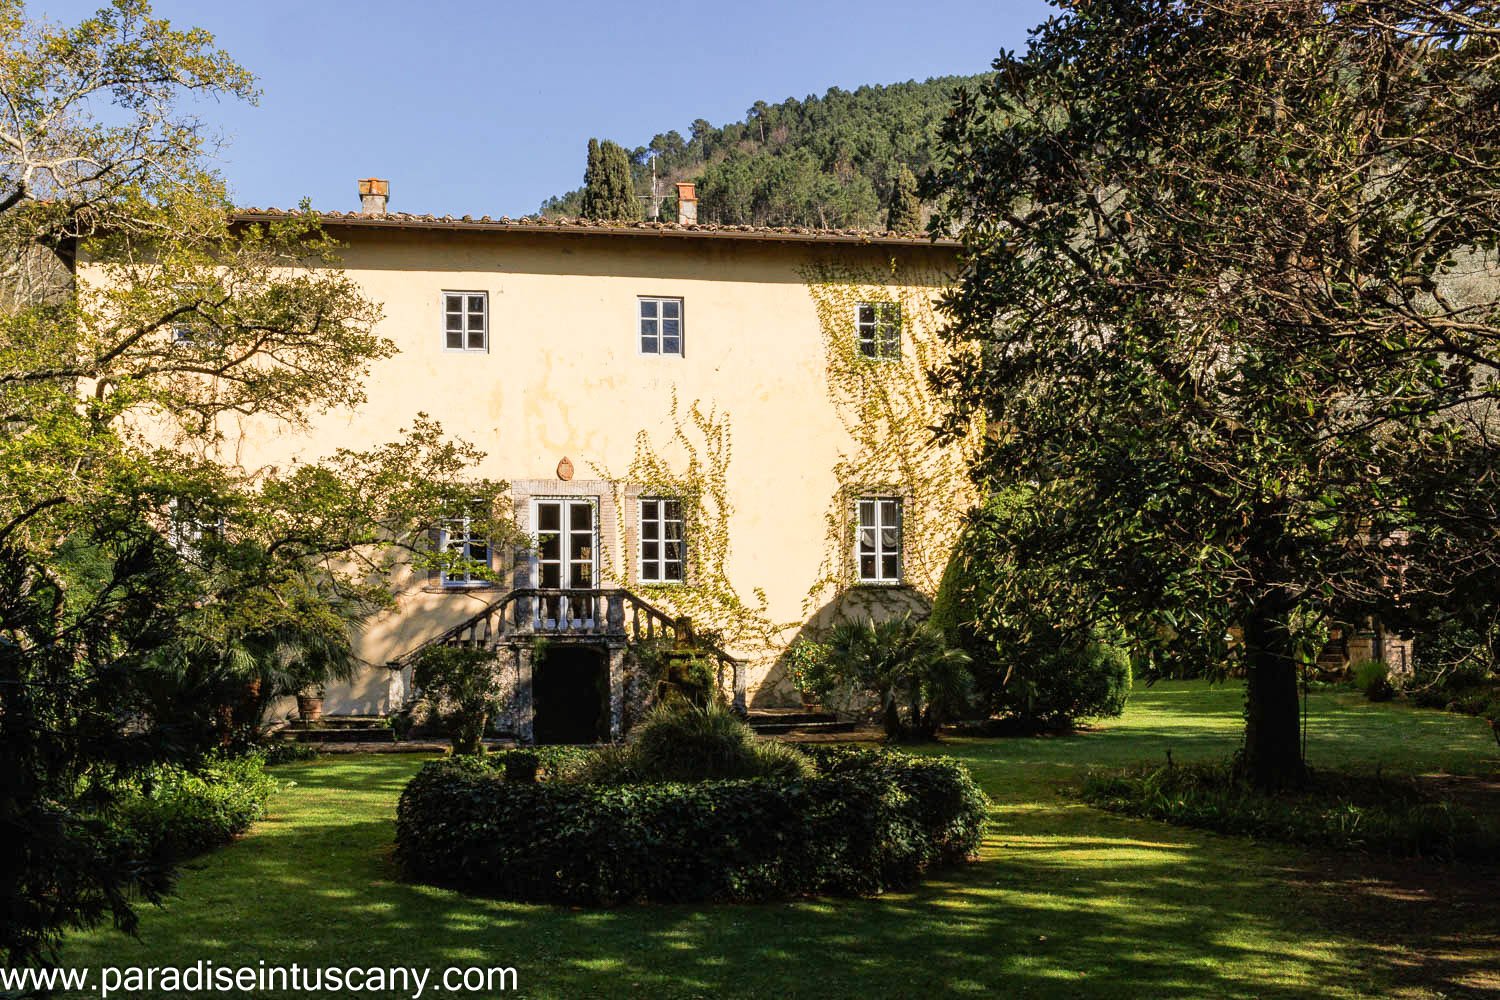 Villa Harmony - A rare gem of 17th century architecture, beautifully restored and fully gated just 10 minutes’ drive to downtown Lucca